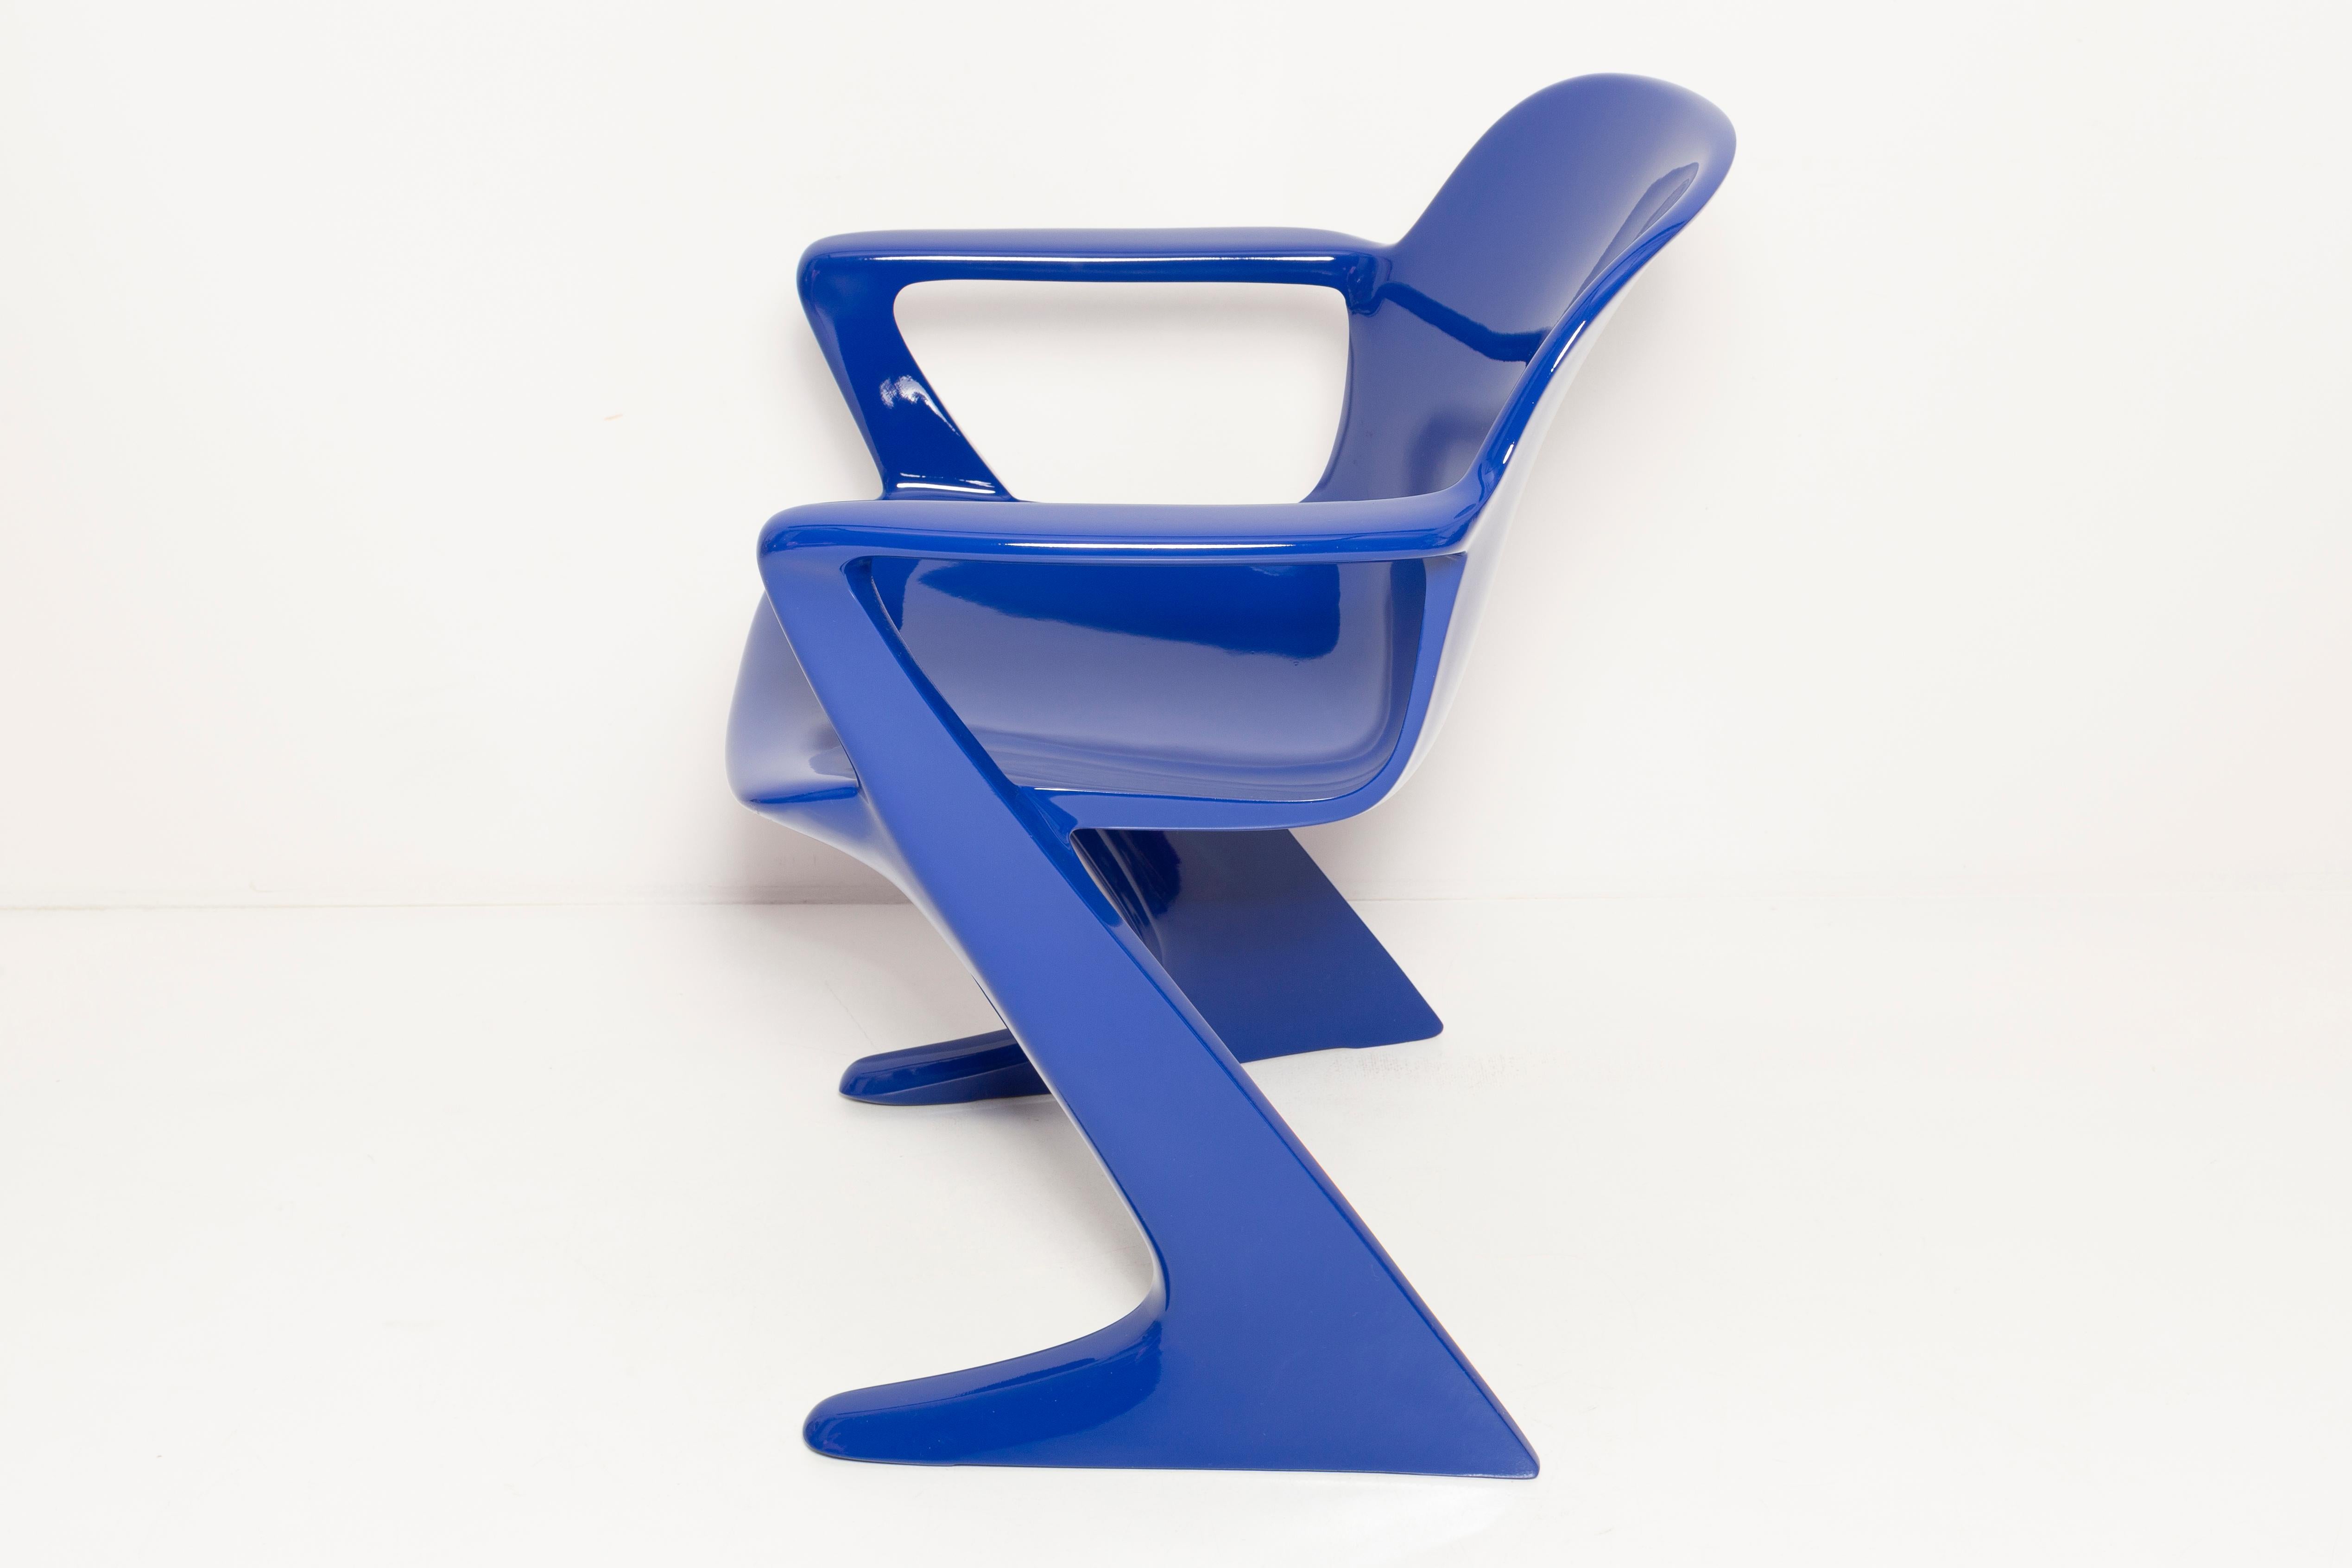 Set of Eight Ultramarine Blue Kangaroo Chairs, by Ernst Moeckl, Germany, 1968 For Sale 2